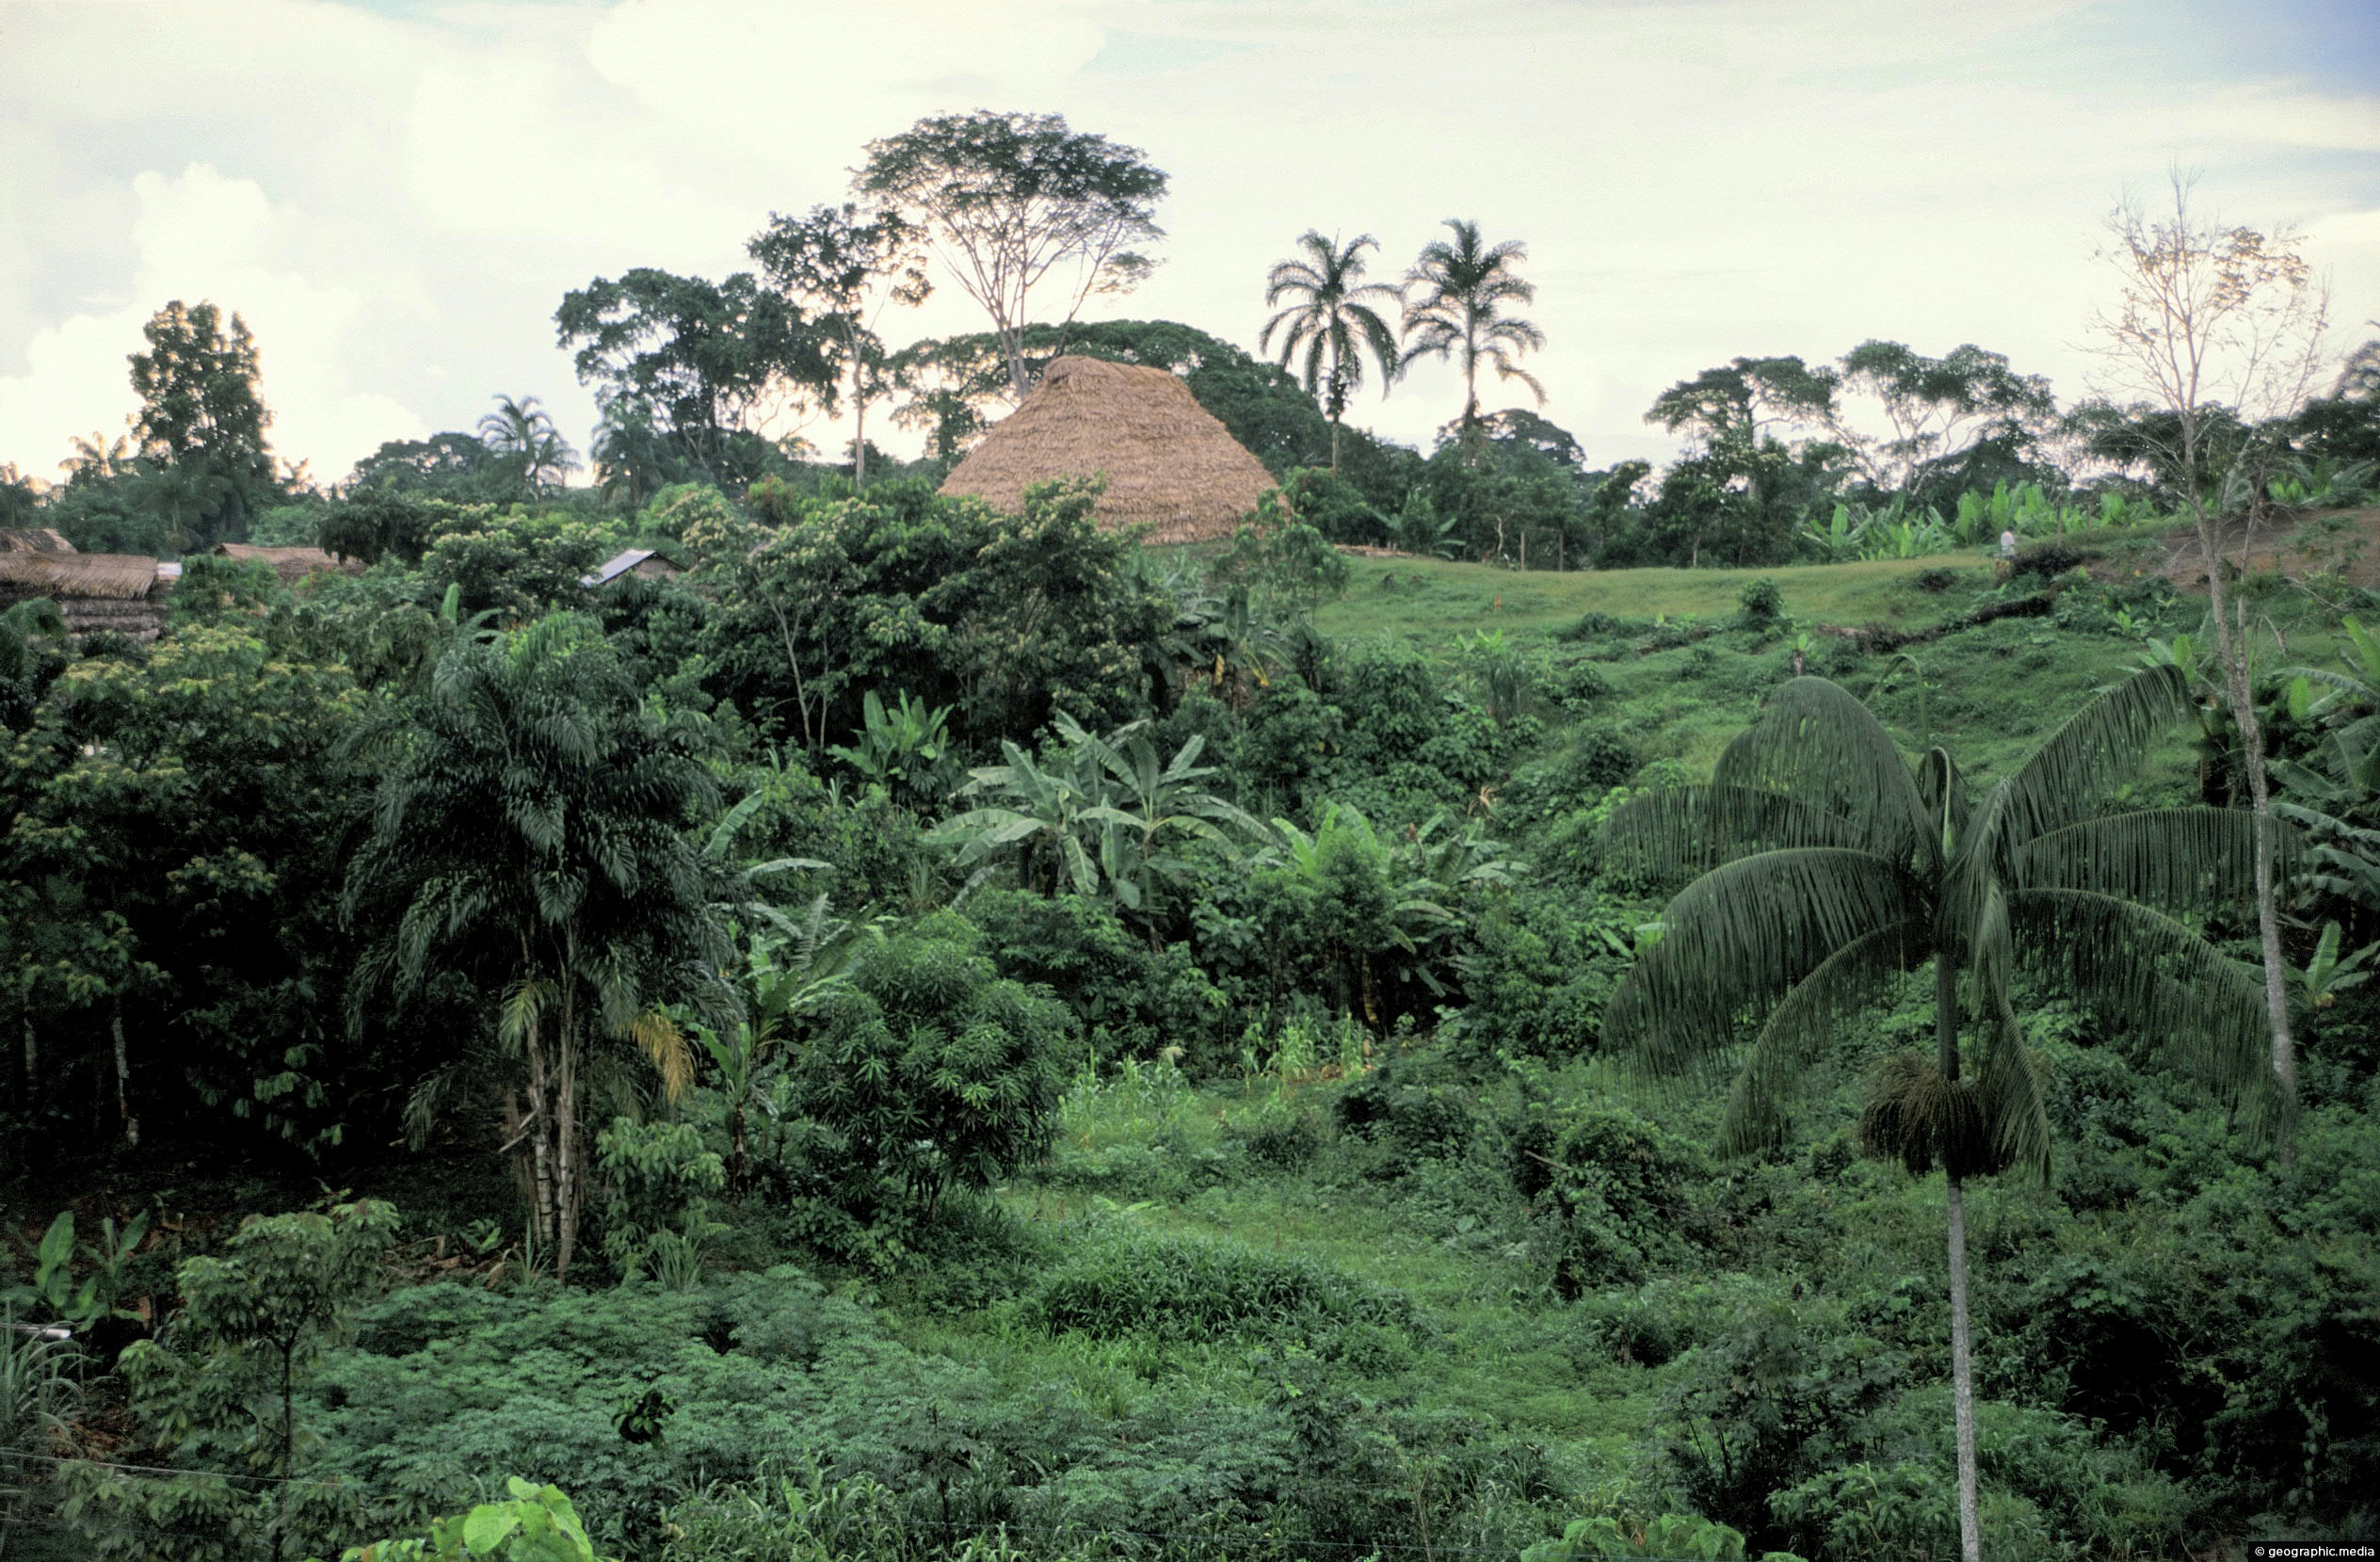 A small settlement in the Amazon